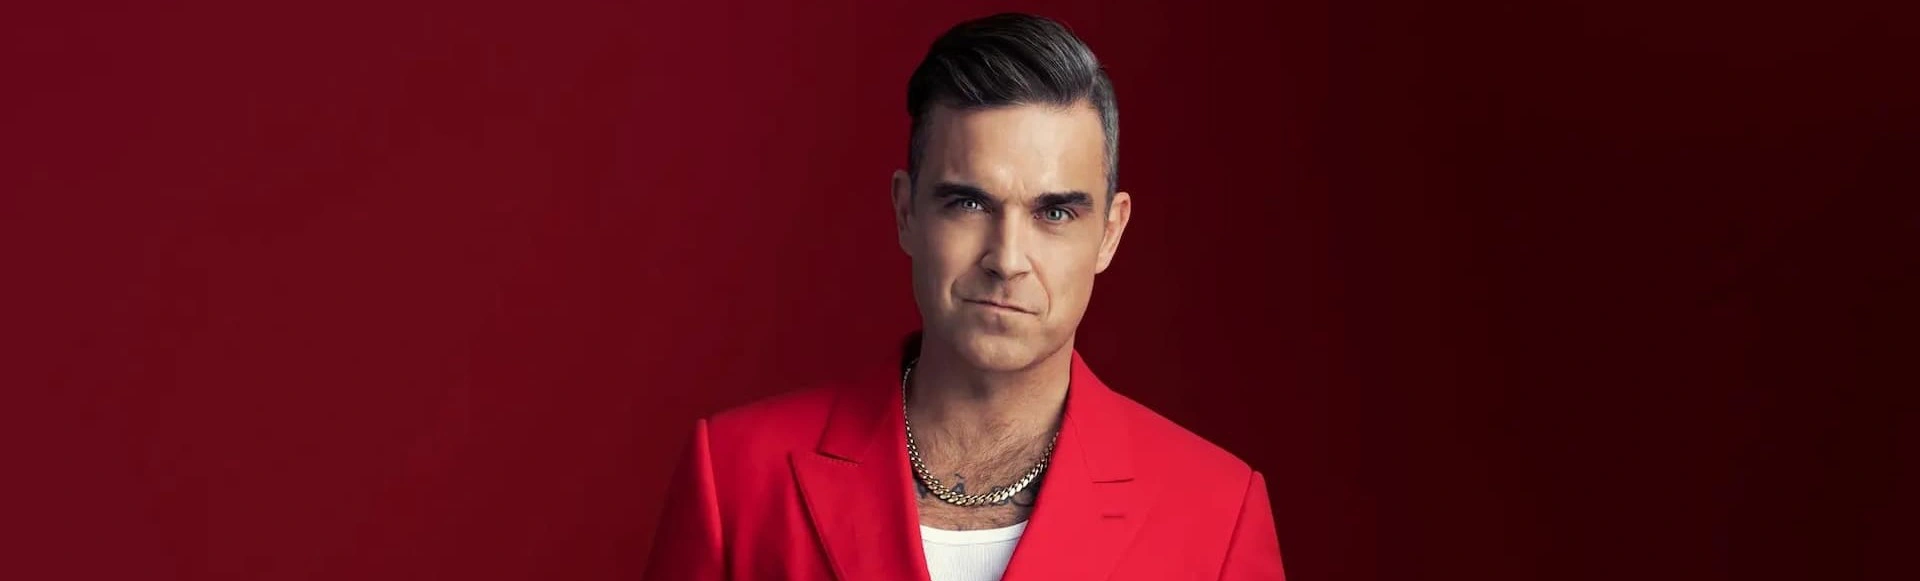 Robbie Williams concert in Abu Dhabi is a unique musical event